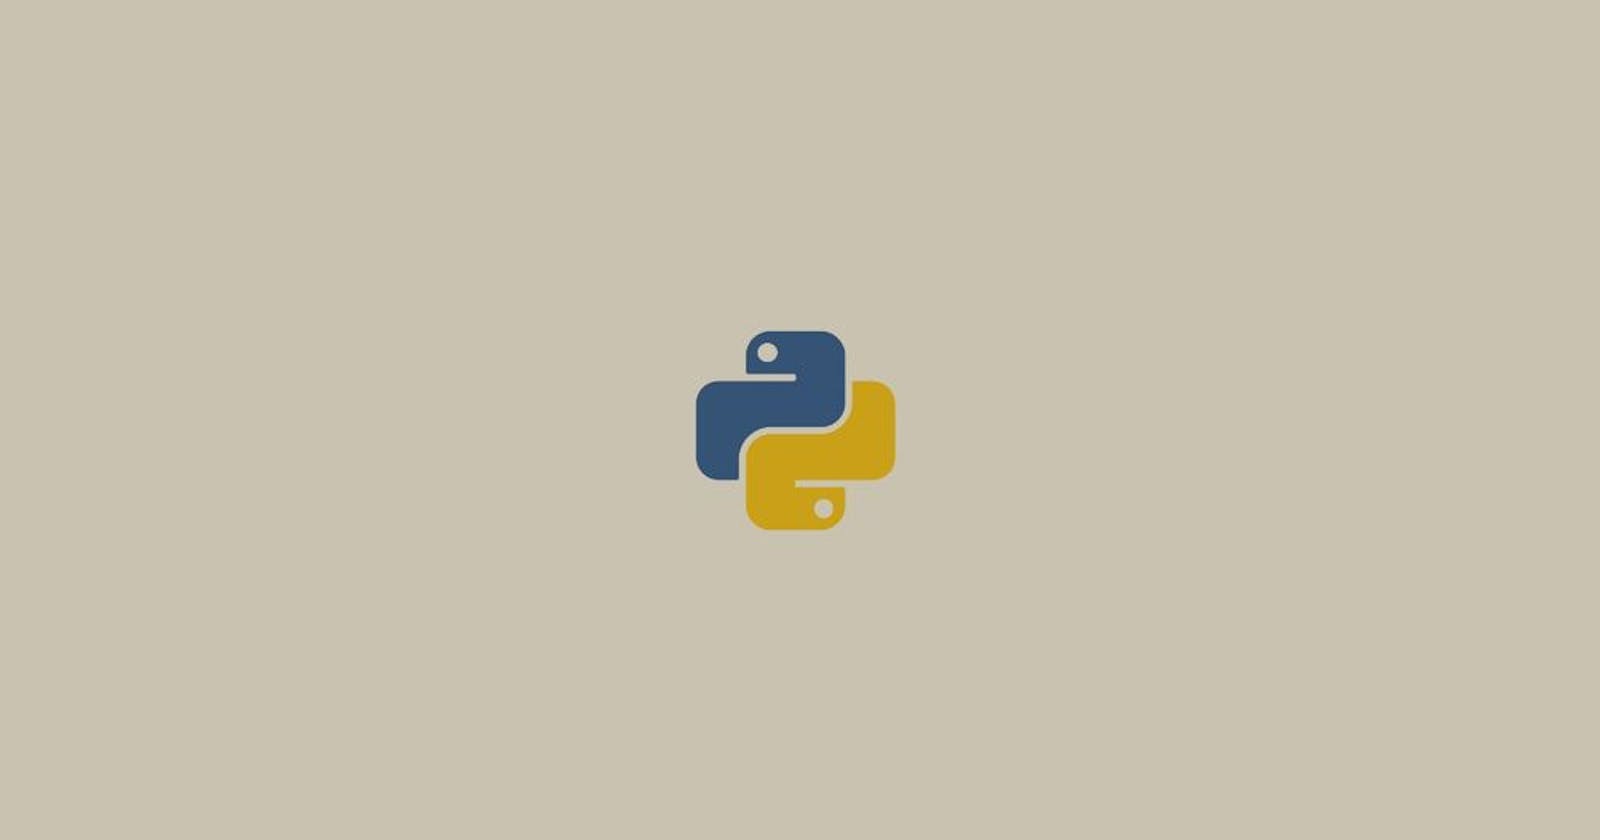 What is a Python docstring?